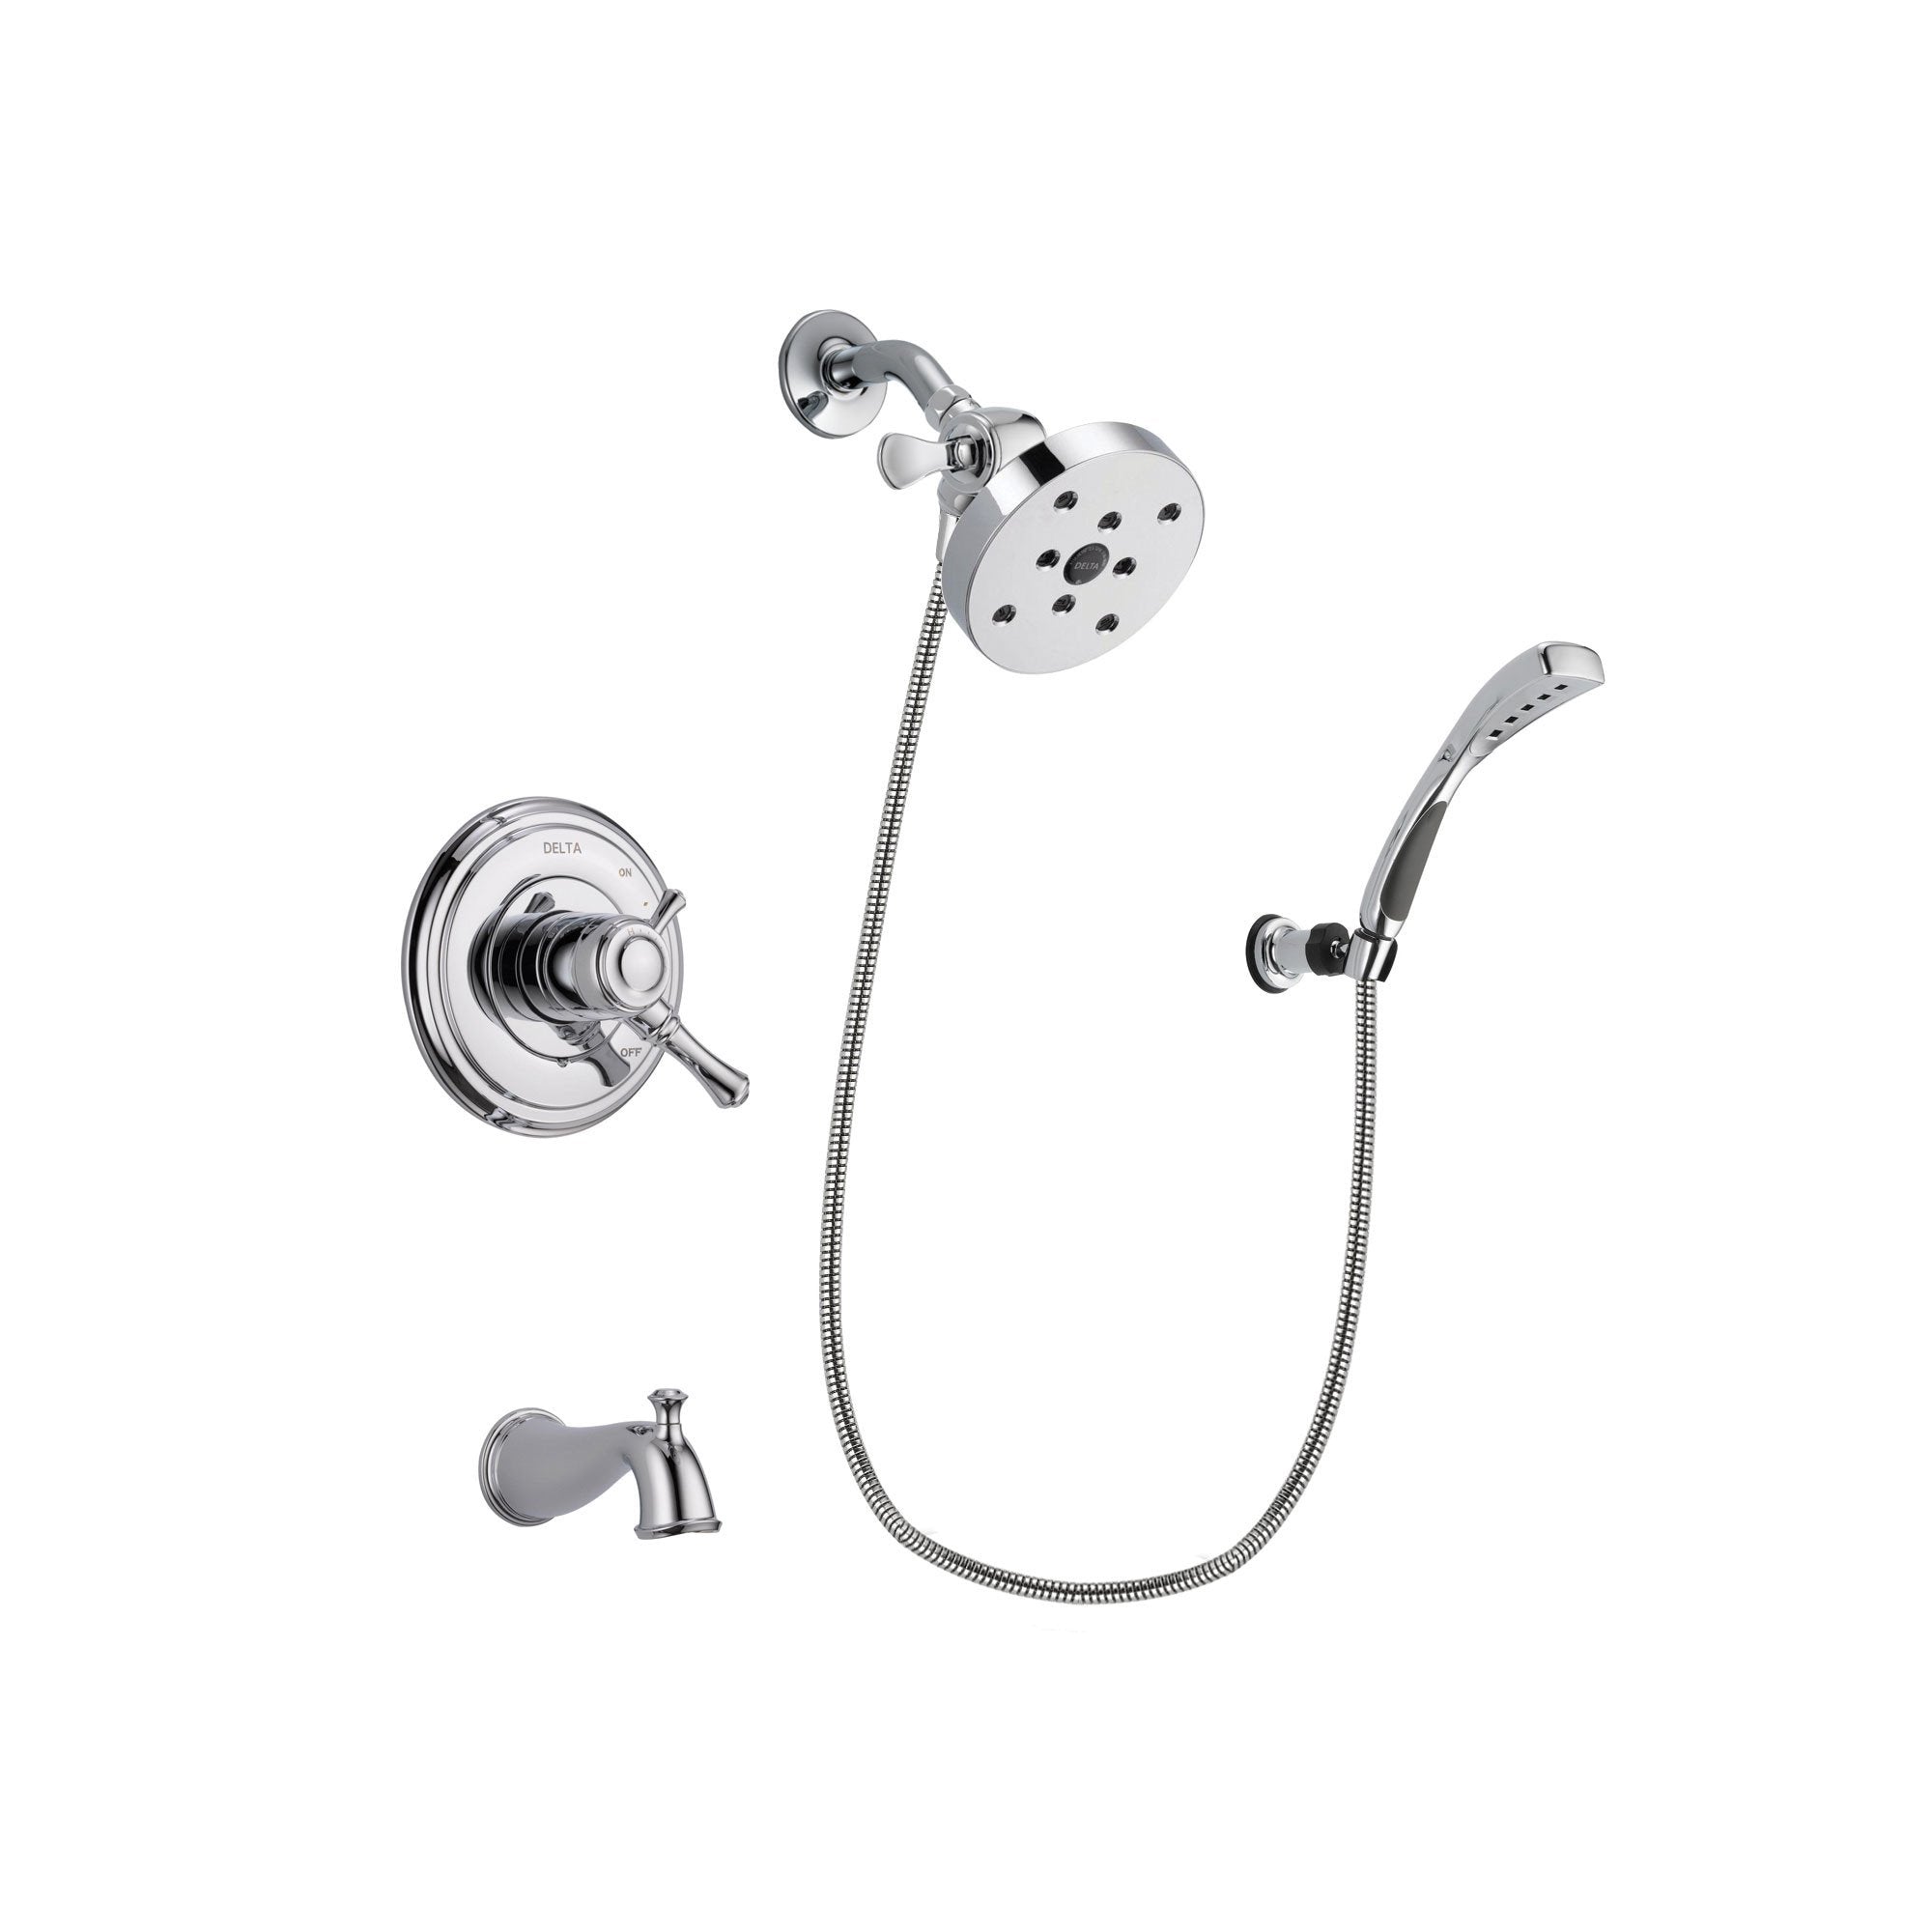 Delta Cassidy Chrome Finish Dual Control Tub and Shower Faucet System Package with 5-1/2 inch Shower Head and Wall-Mount Bracket with Handheld Shower Spray Includes Rough-in Valve and Tub Spout DSP1103V